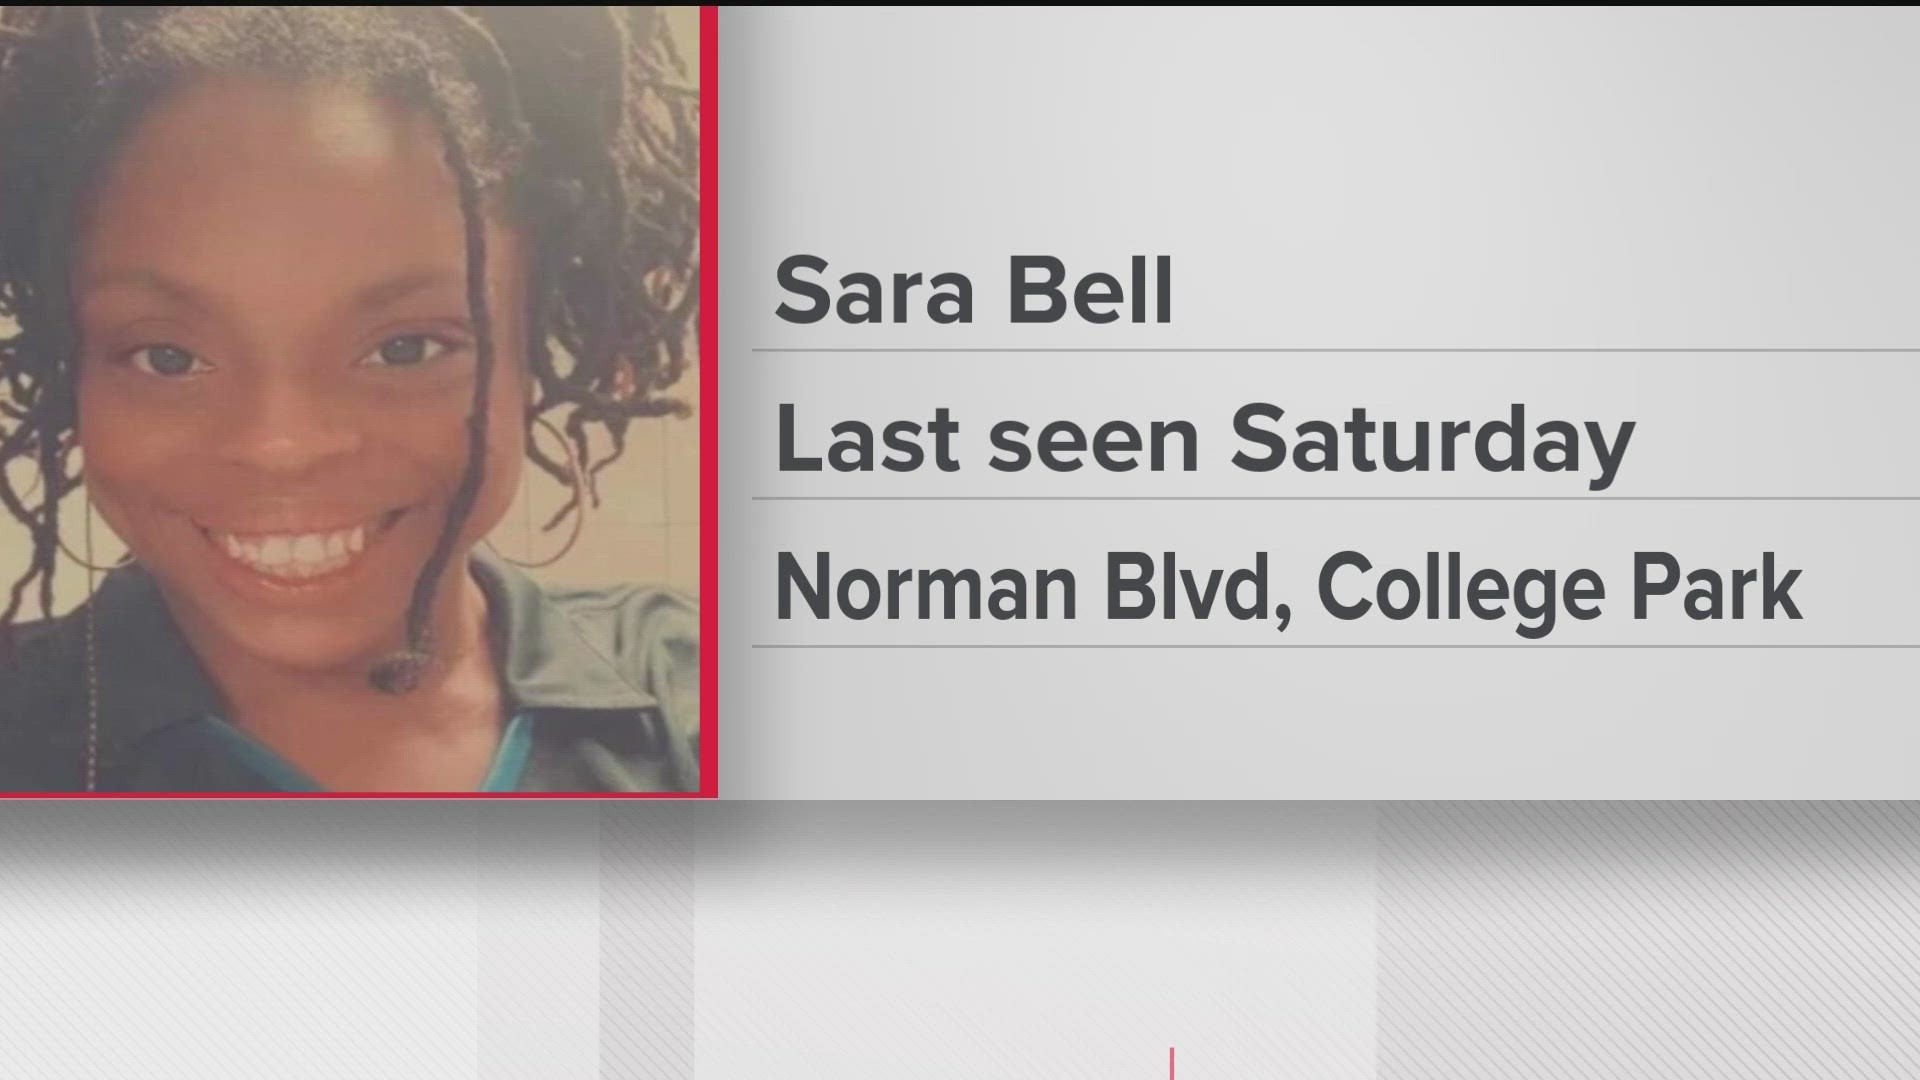 She was last seen Saturday on Norman Boulevard.